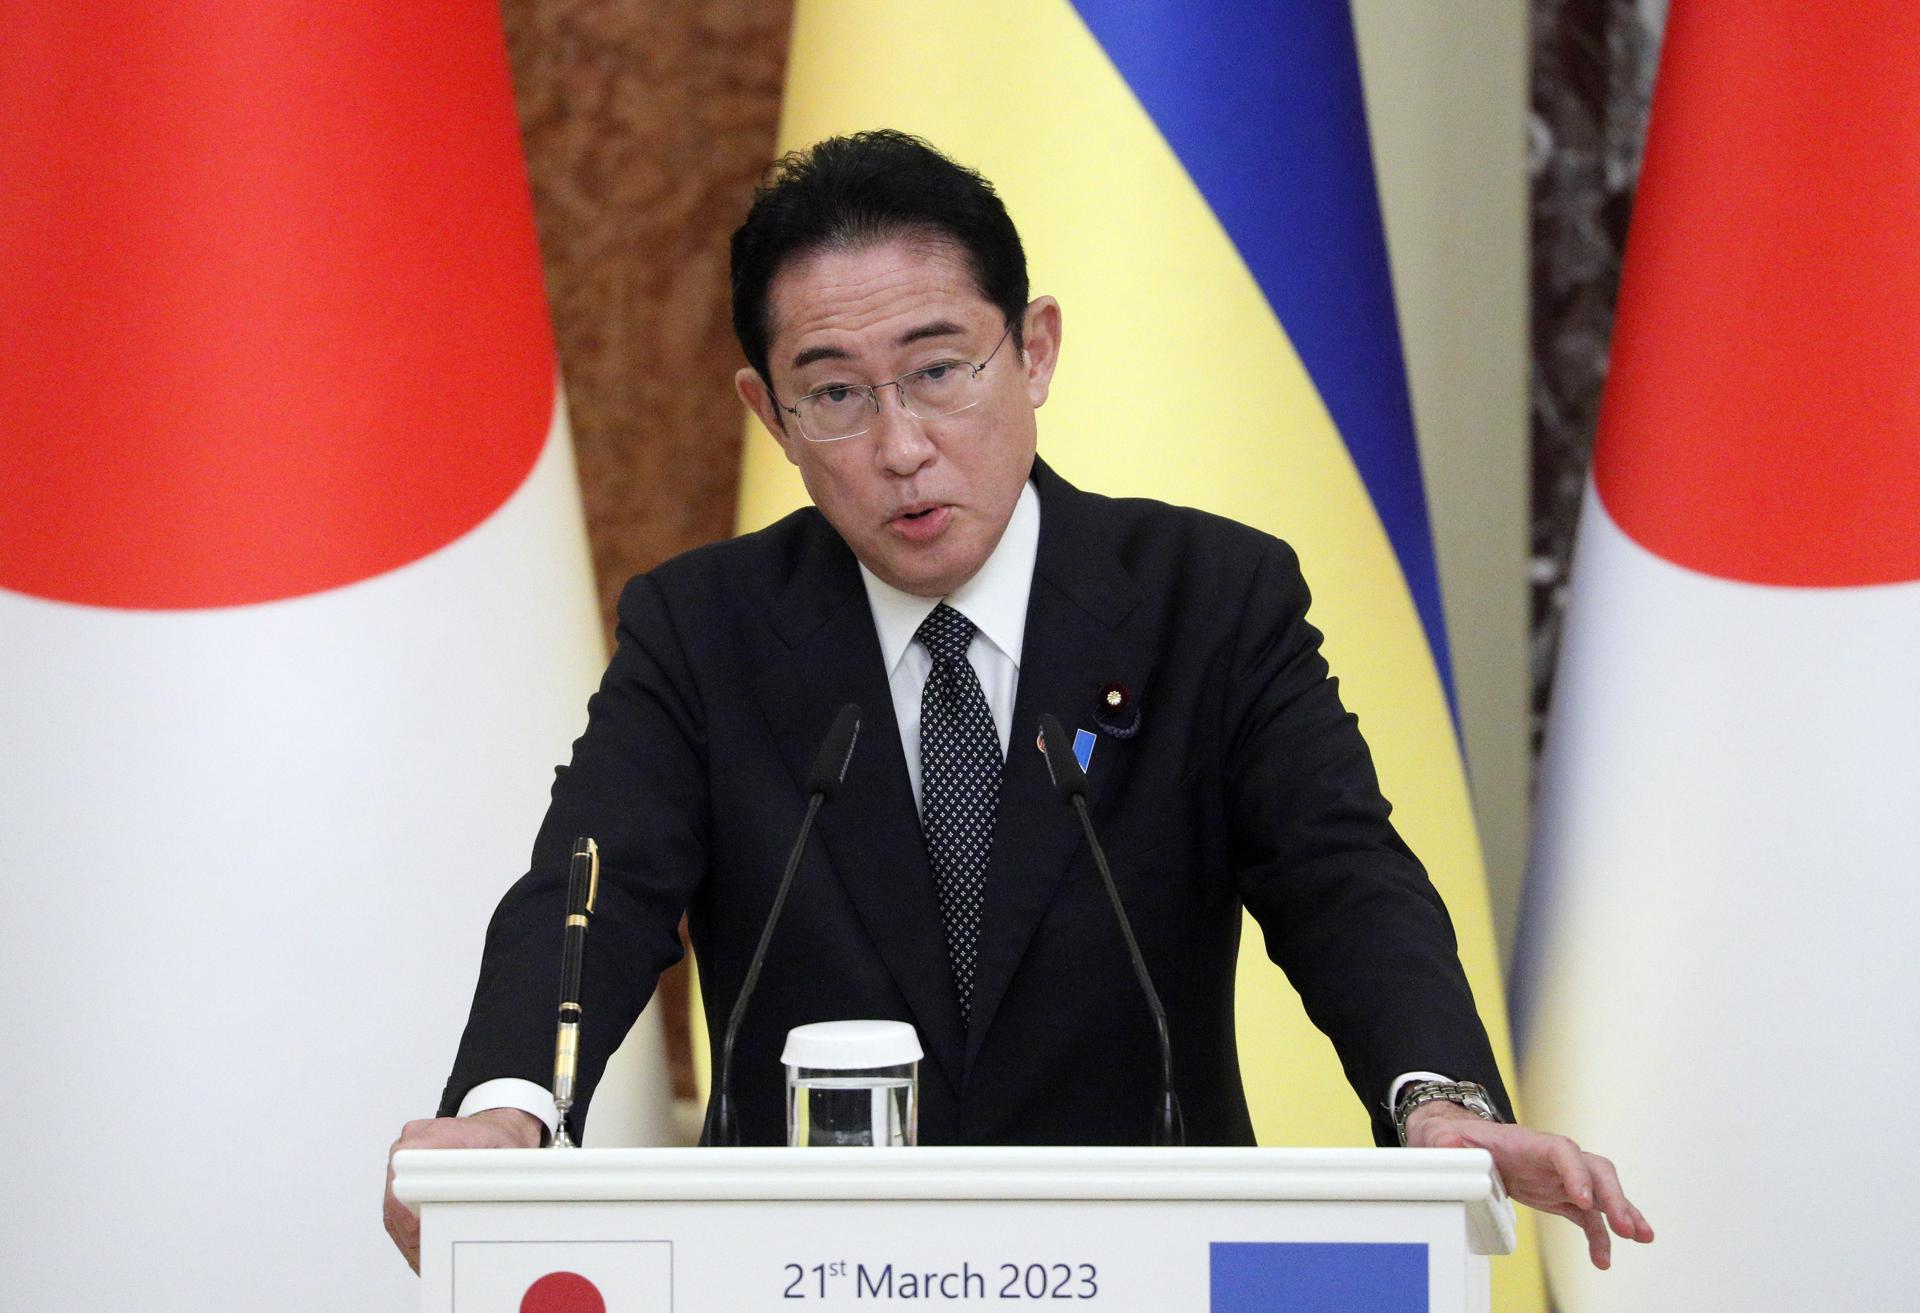 Japanese Prime Minister Fumio Kishida speaks at a joint press conference with Ukrainian President Volodymyr Zelensky (not pictured) following their meeting in Kyiv, Ukraine, 21 March 2023. EFE-EPA/SERGEY DOLZHENKO